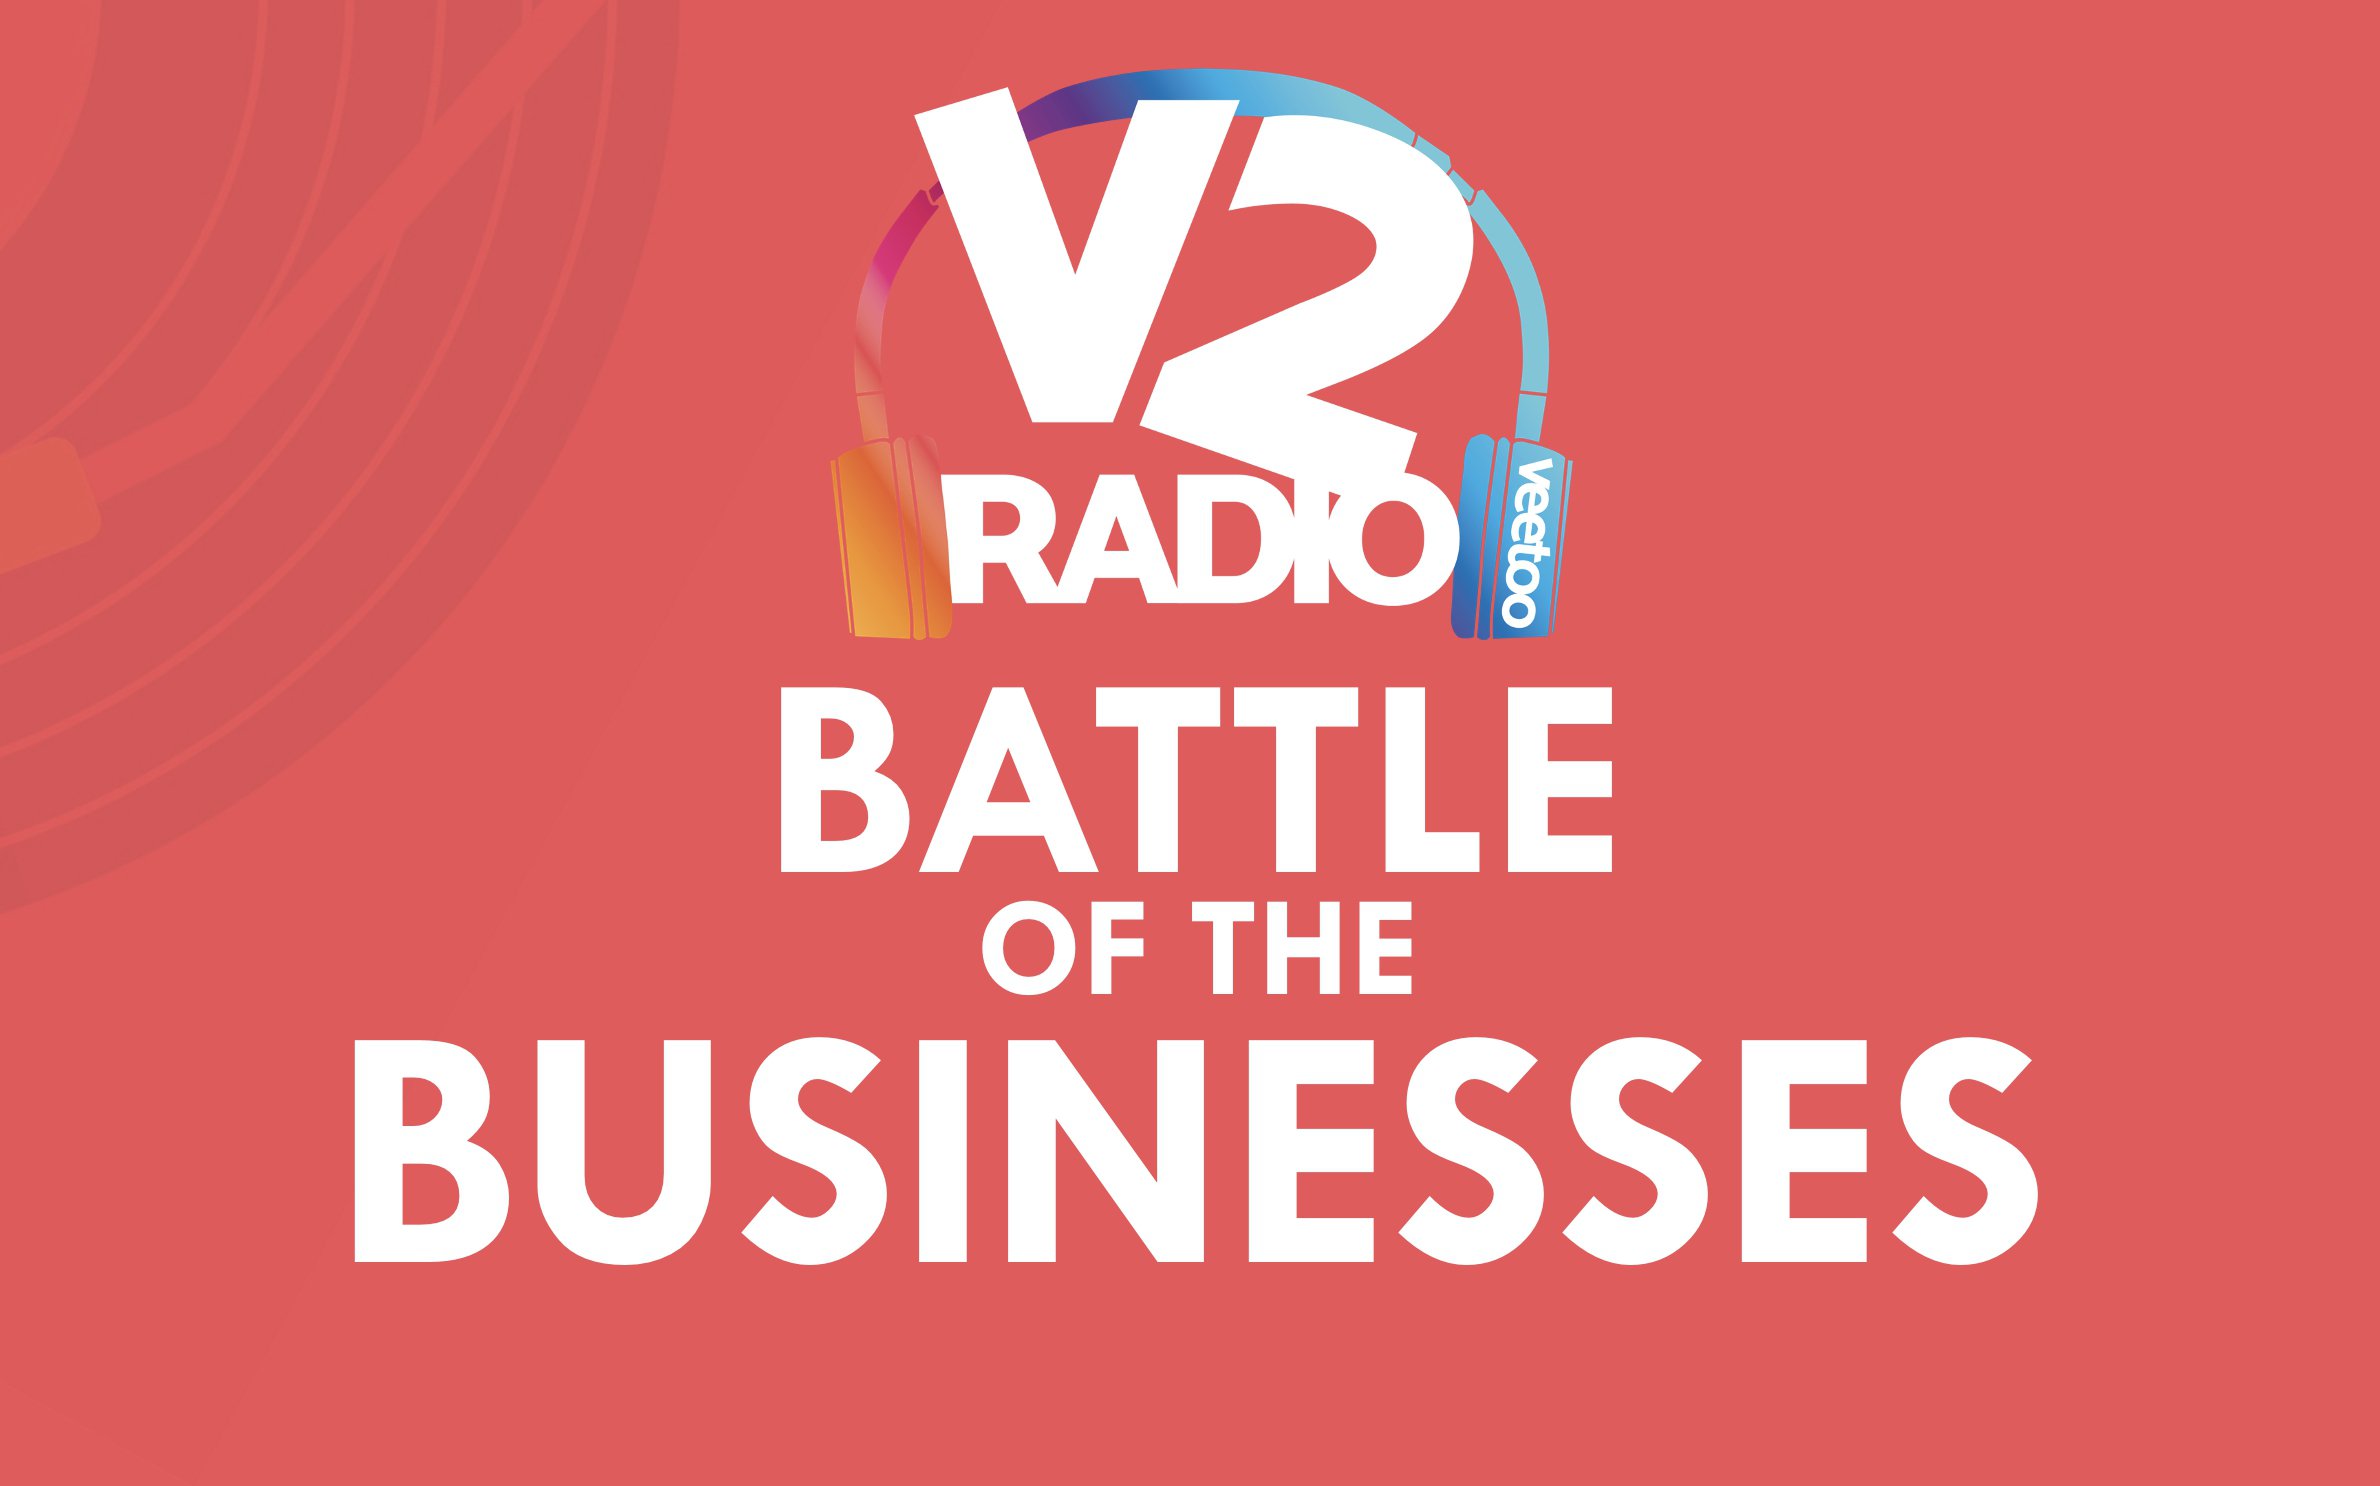 Battle of the Businesses V2 Radio Sussex